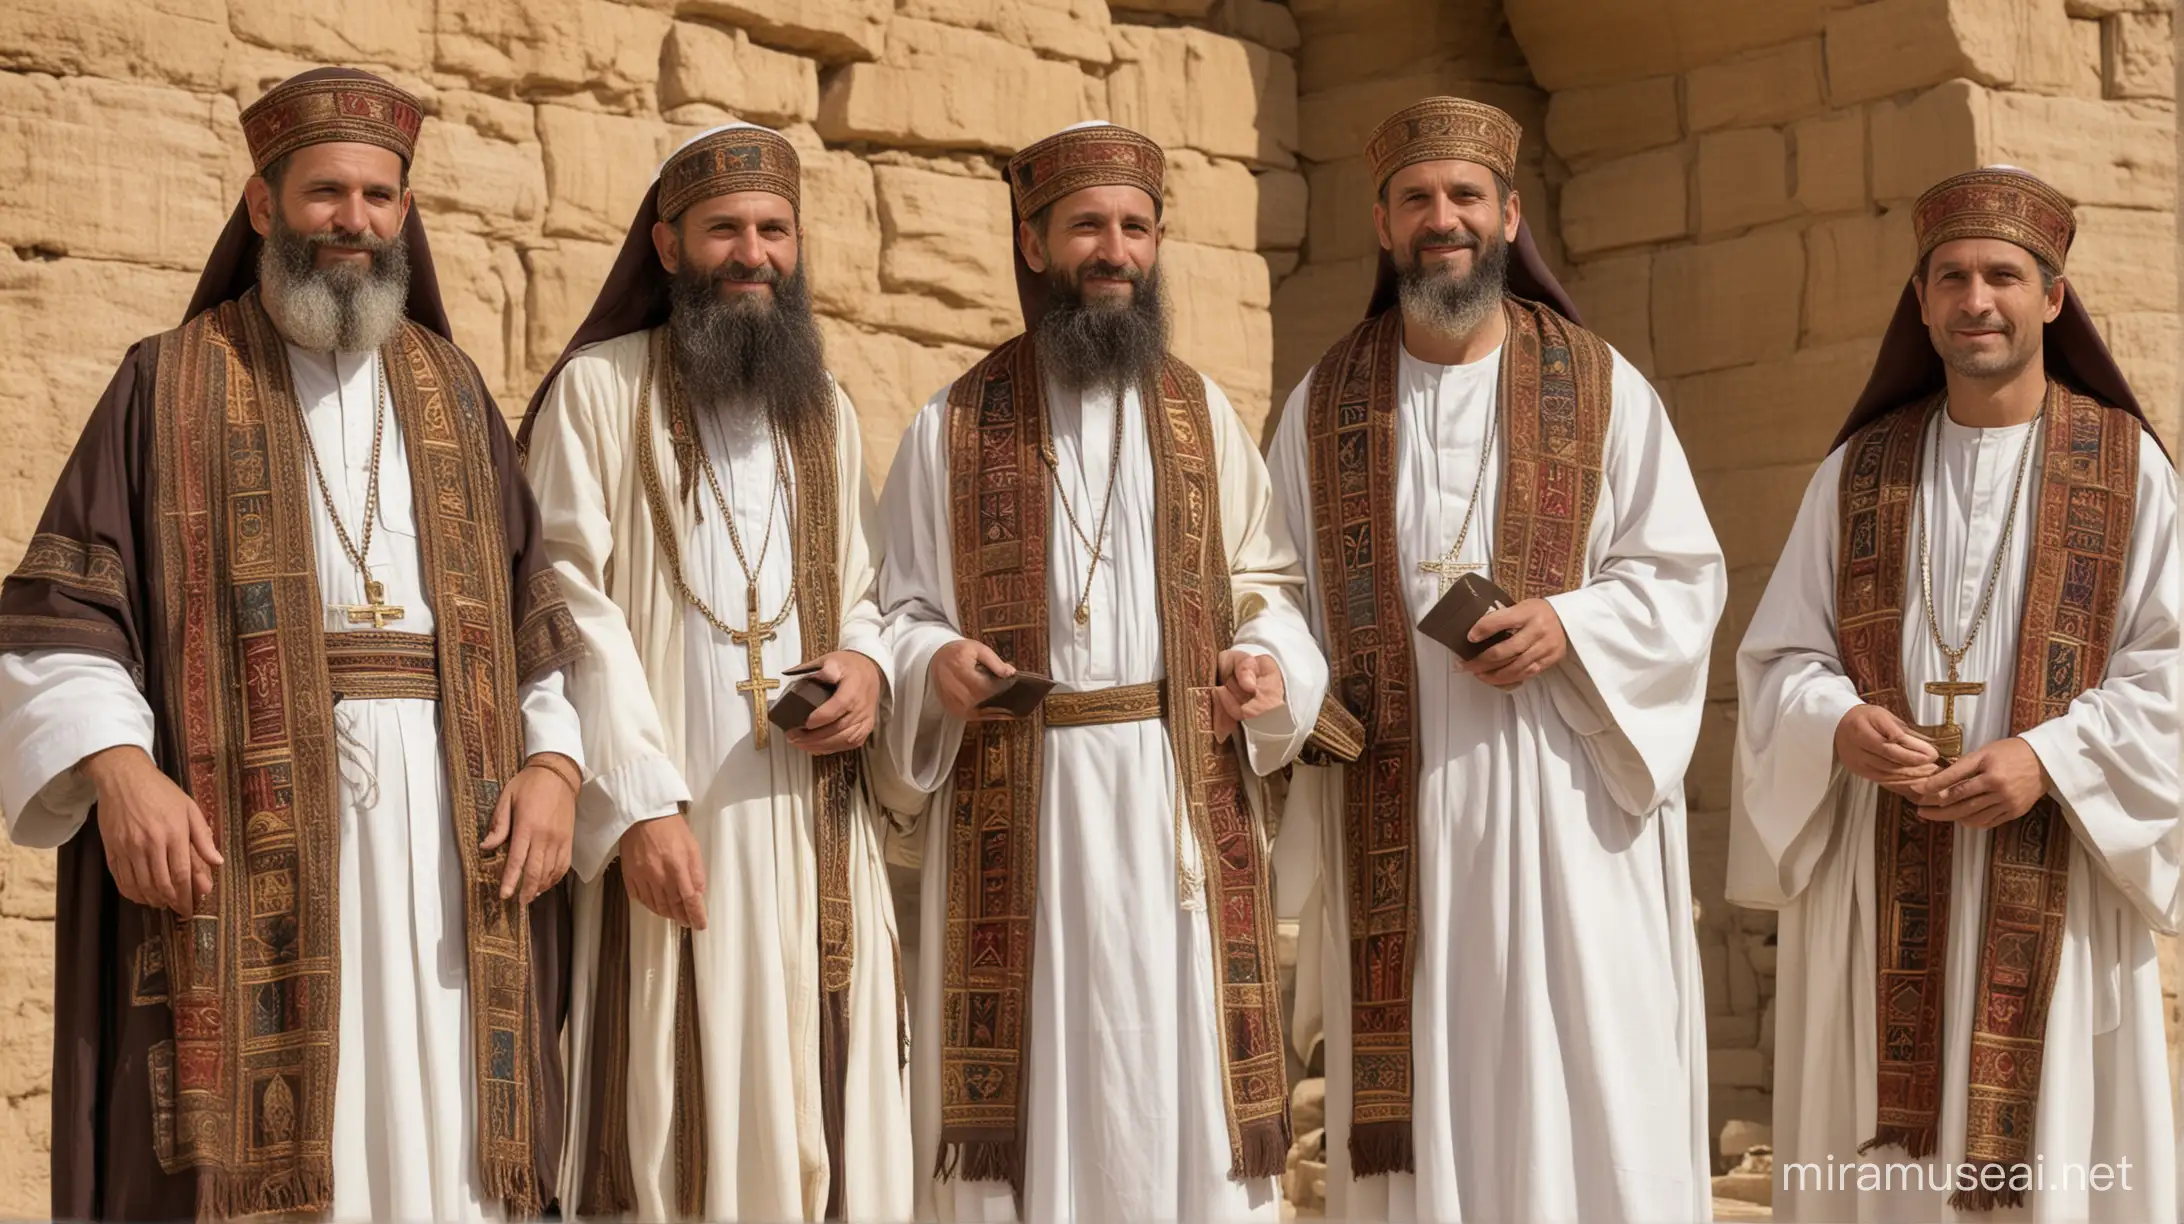 Levitical Priests in Their Thirties and Forties from the Era of Moses